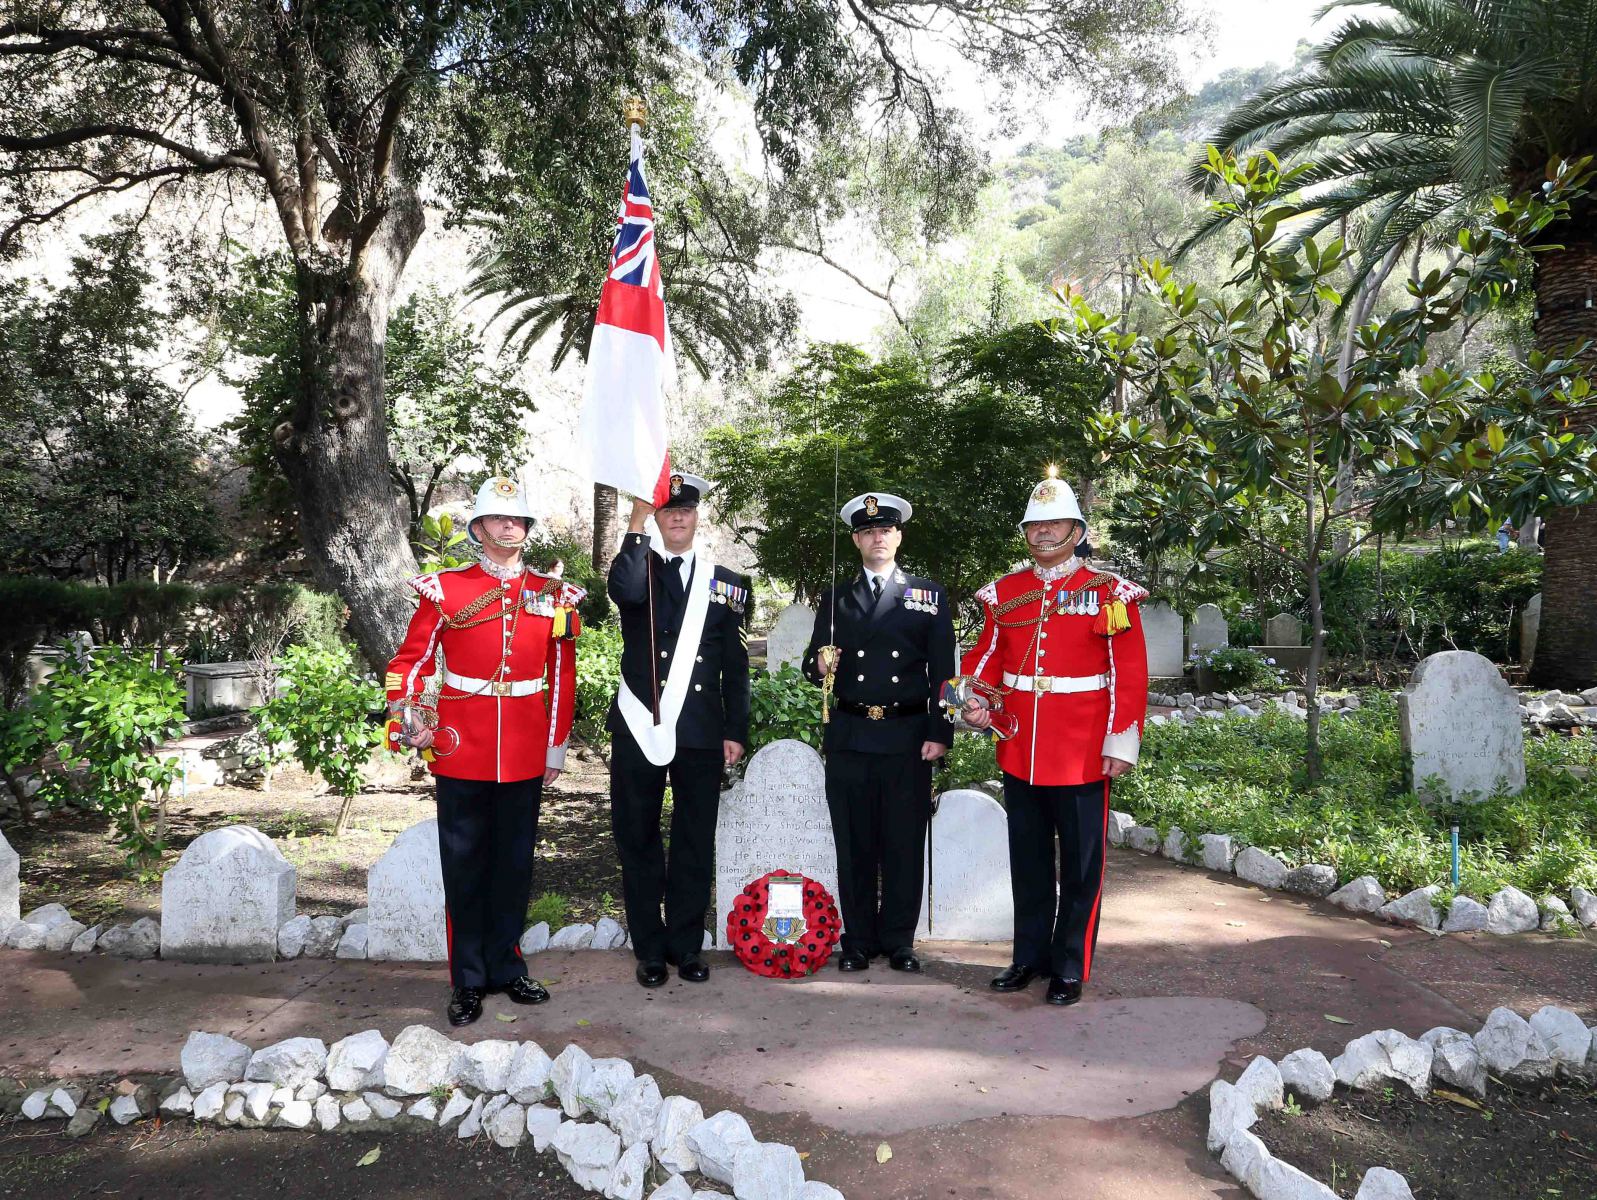 The Anniversary of The Battle Of Trafalgar, An act of remembrance held within The Trafalgar Cemetery Gibraltar, Sunday 18th October 2015.VIP's included Interim Governor, Chief Minister, 2nd Sea Lord and CBF. A religious cervice was held at the King's Chapel and afterwards the remembrance moved to the cemetery.